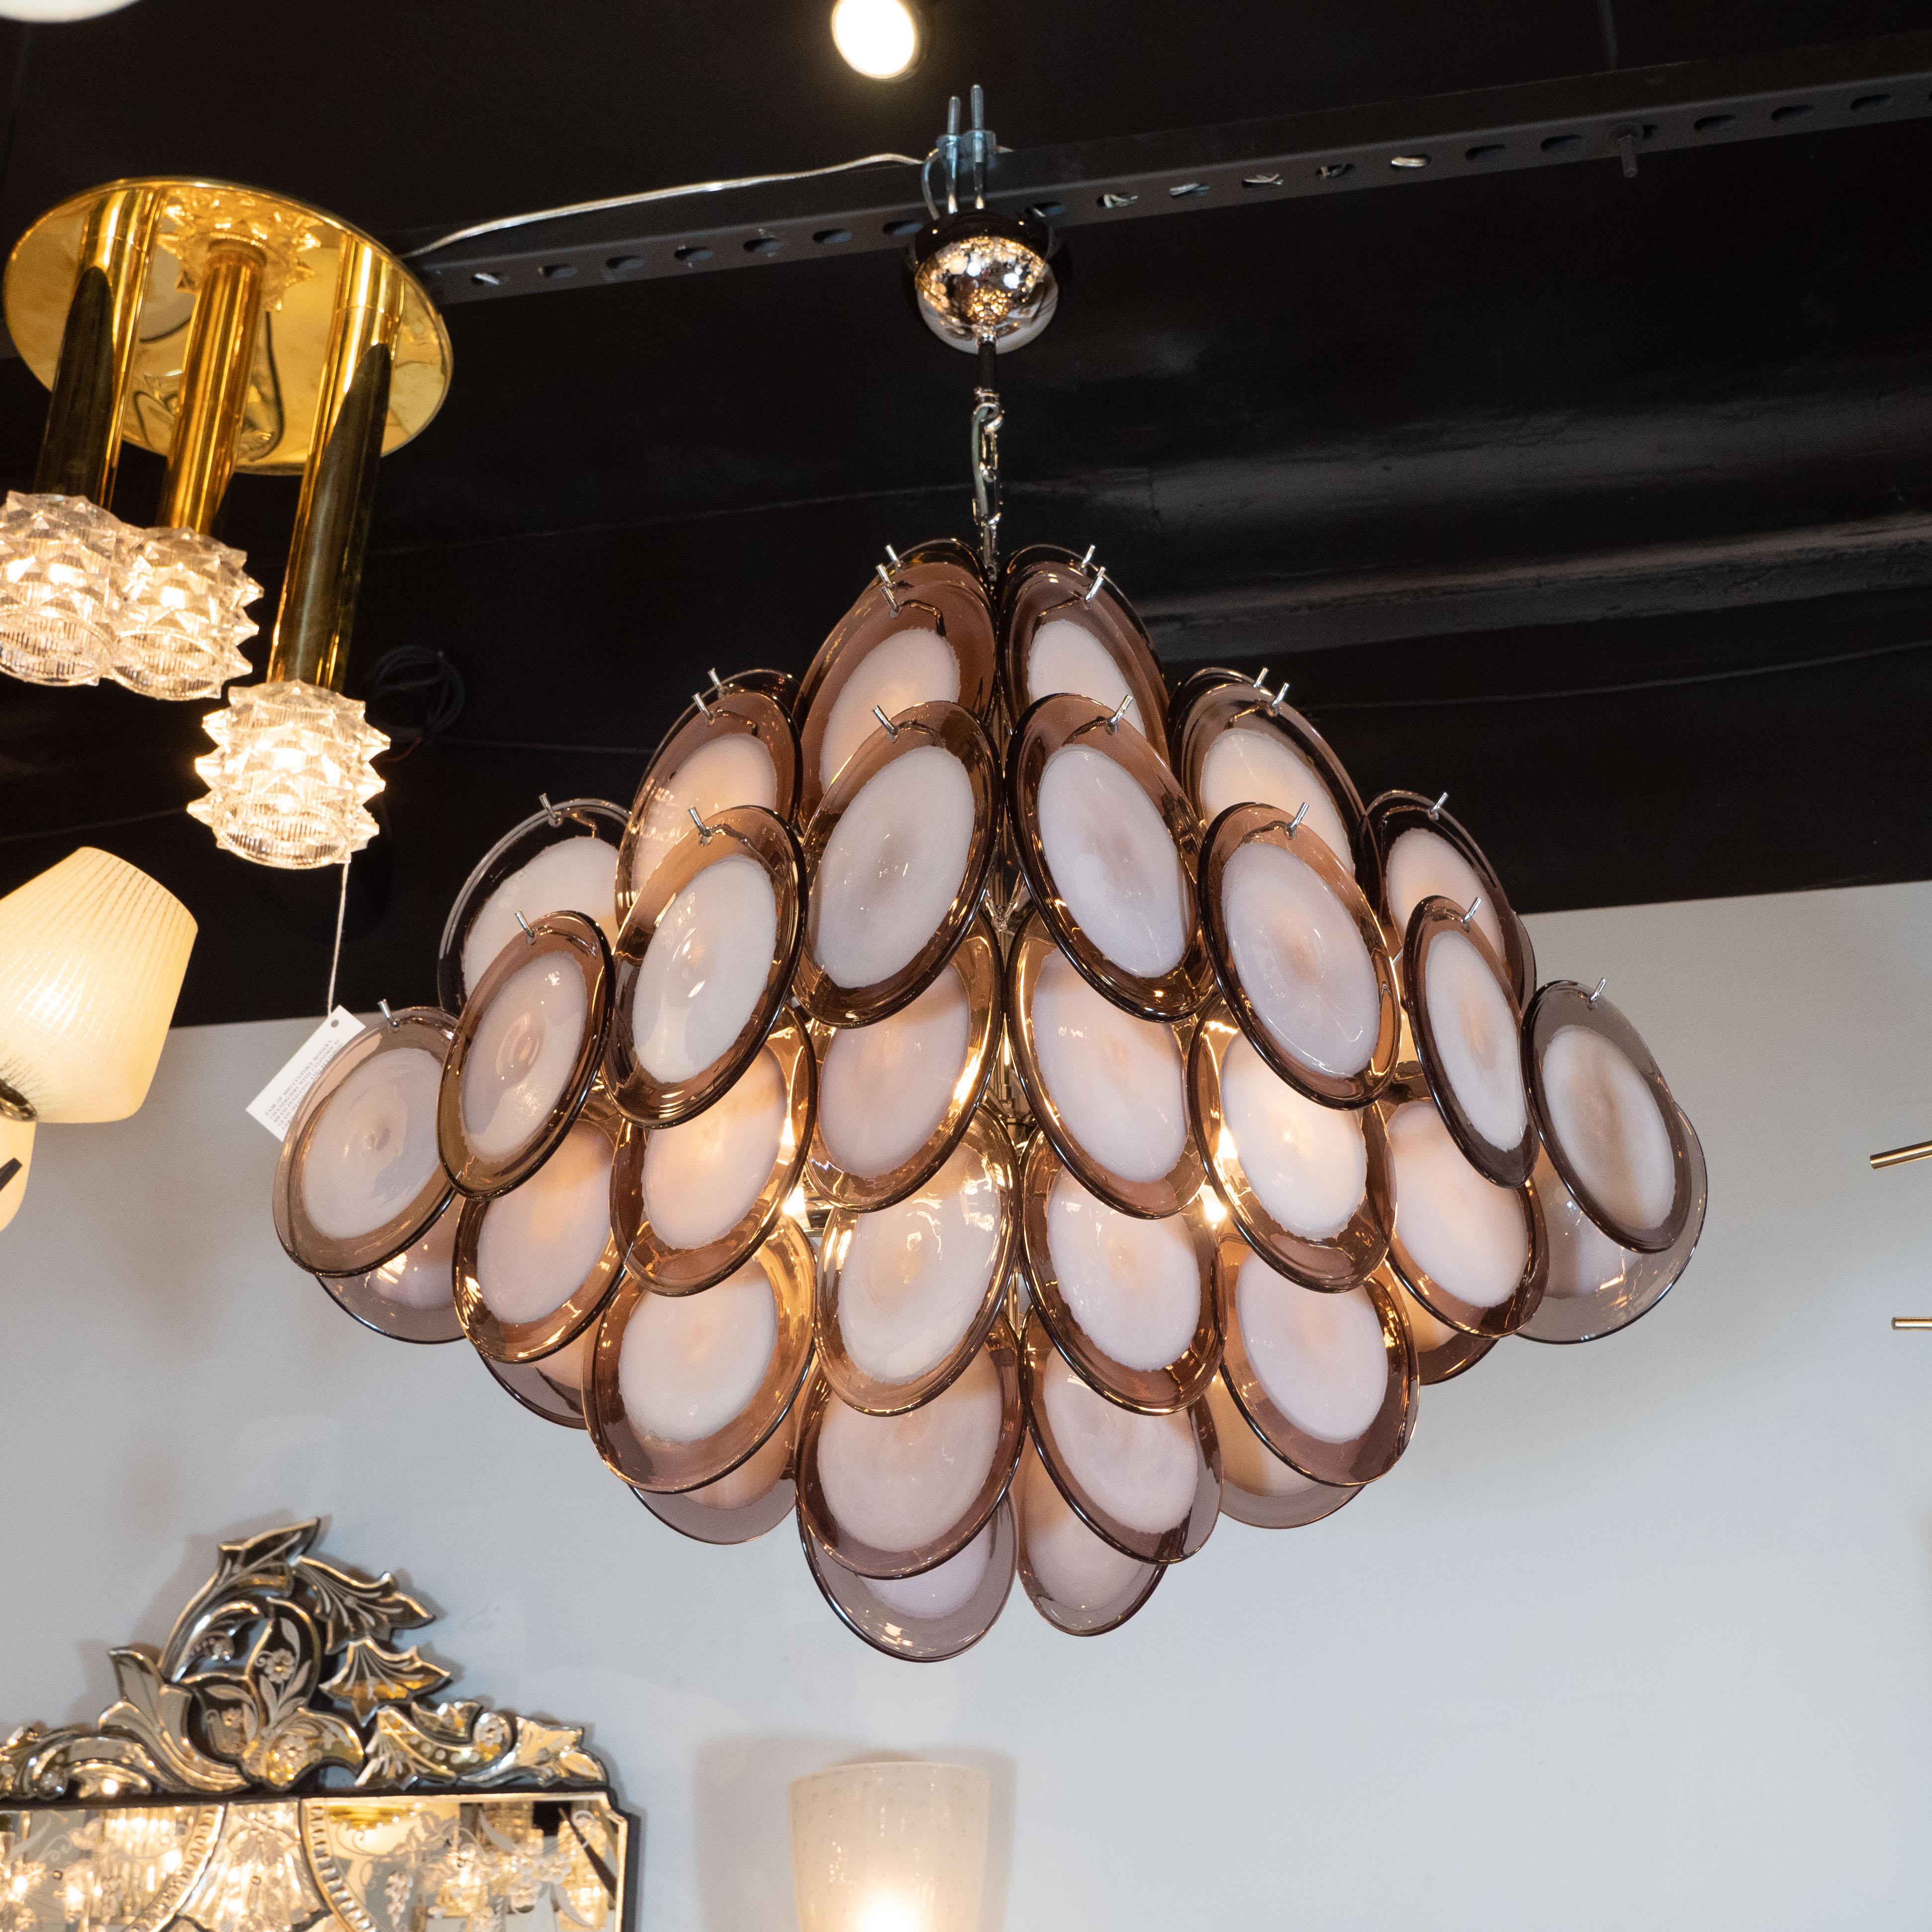 This elegant chandelier was realized in Murano, Italy- the island off the coast of Venice renowned for centuries for their superlative glass production. It features a pagoda style body- consisting of an abundance of Vistosi style discs with opaque